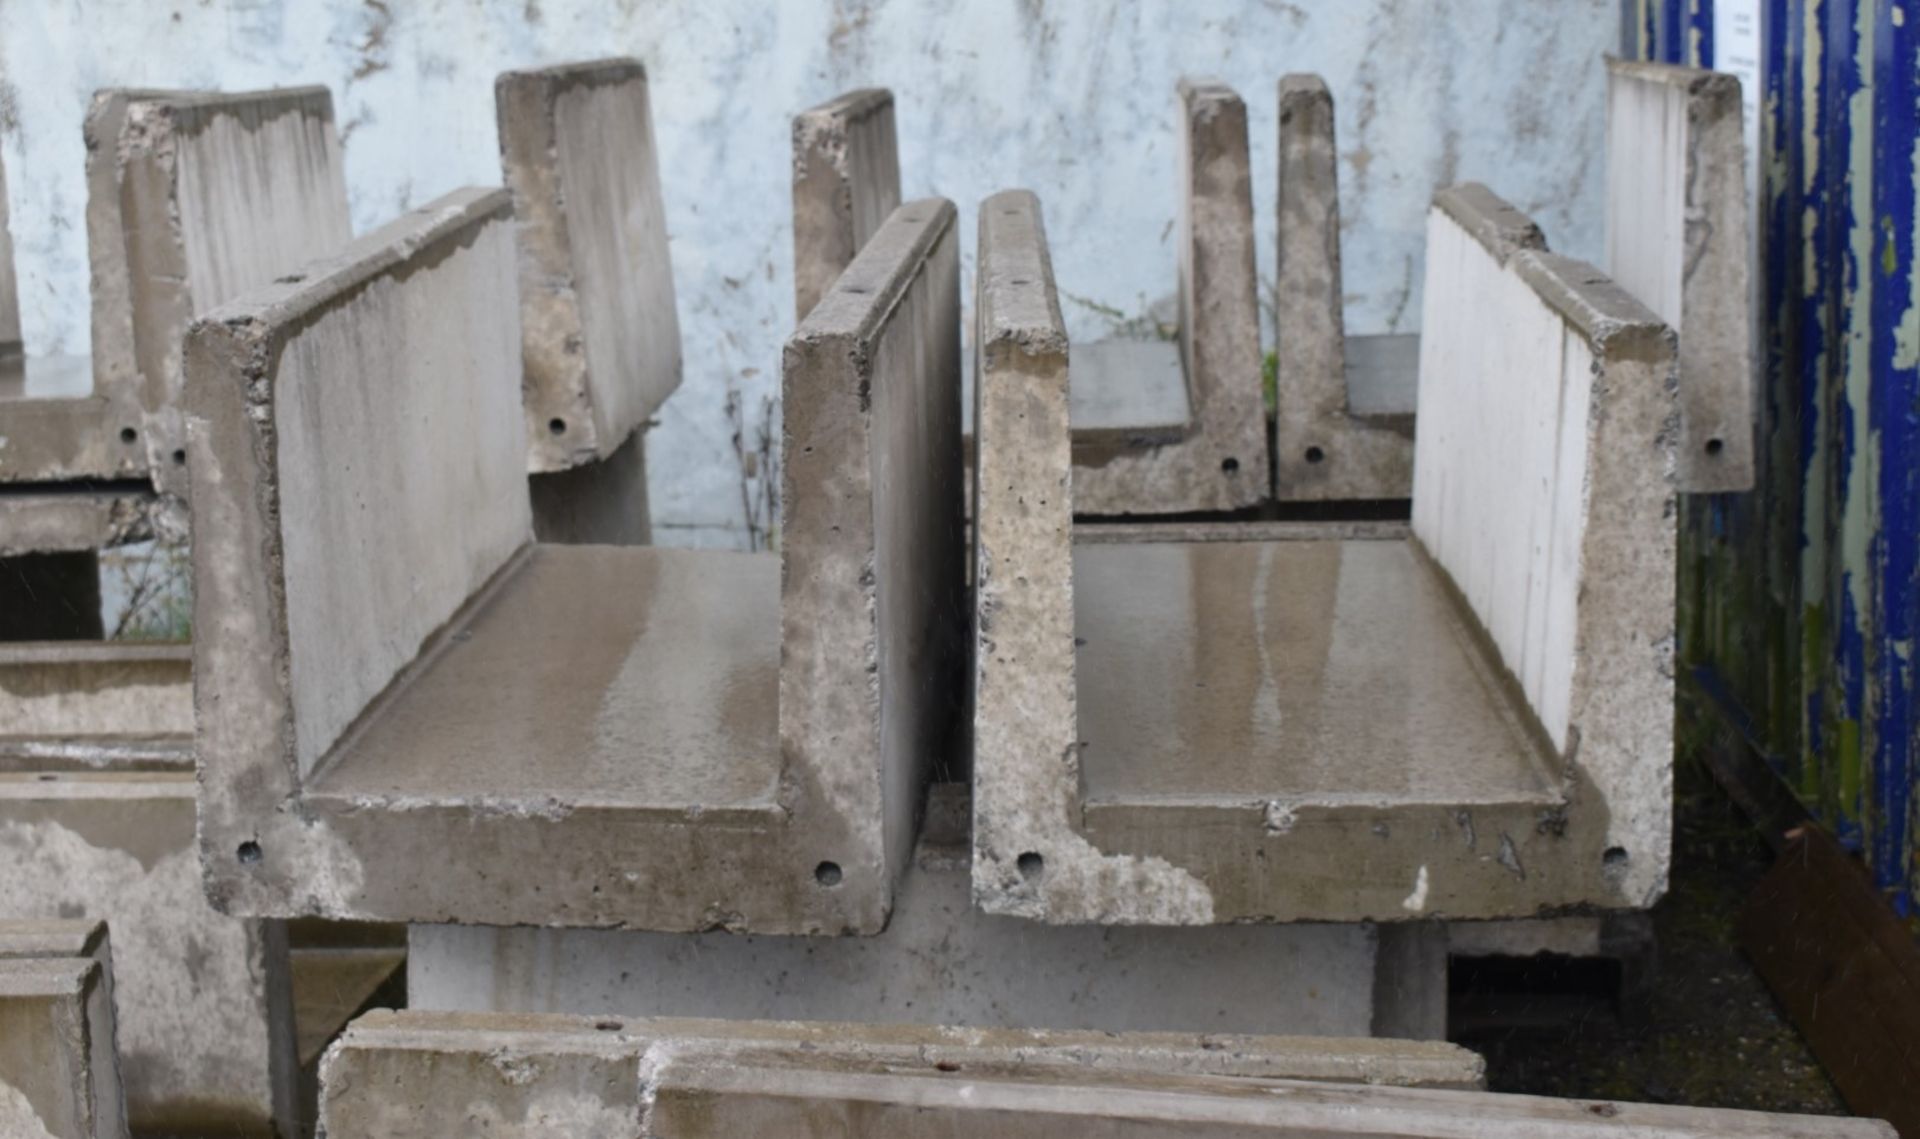 20 x Precast Stone Cable / Pipe Protection Trenches - Size of Each 100x61x88 cms - CL547 - Location: - Image 10 of 10